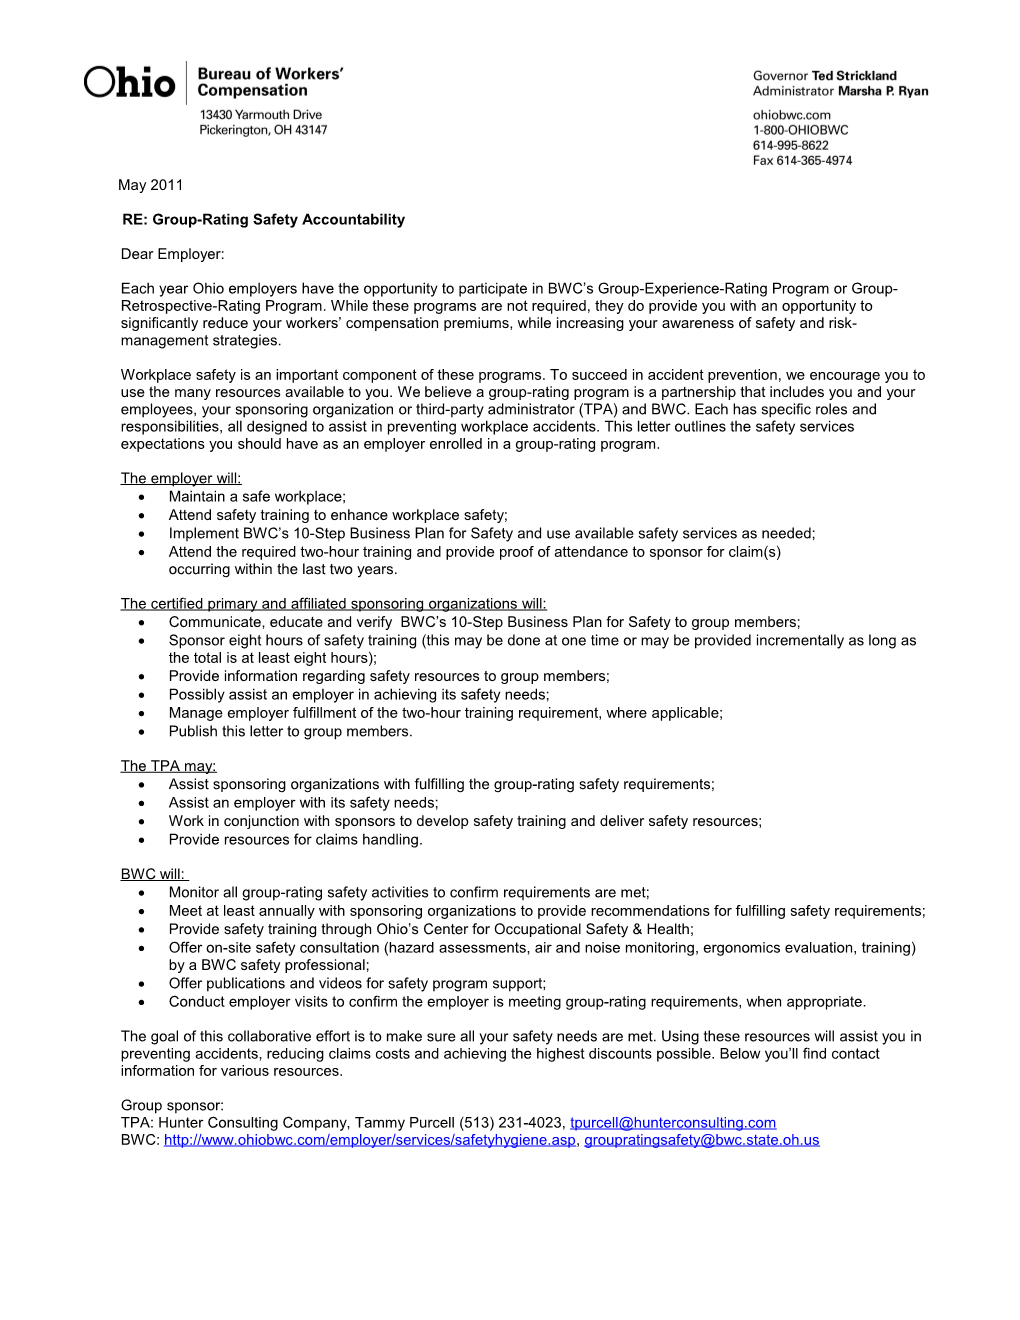 Group-Rating Safety Accountability Letter